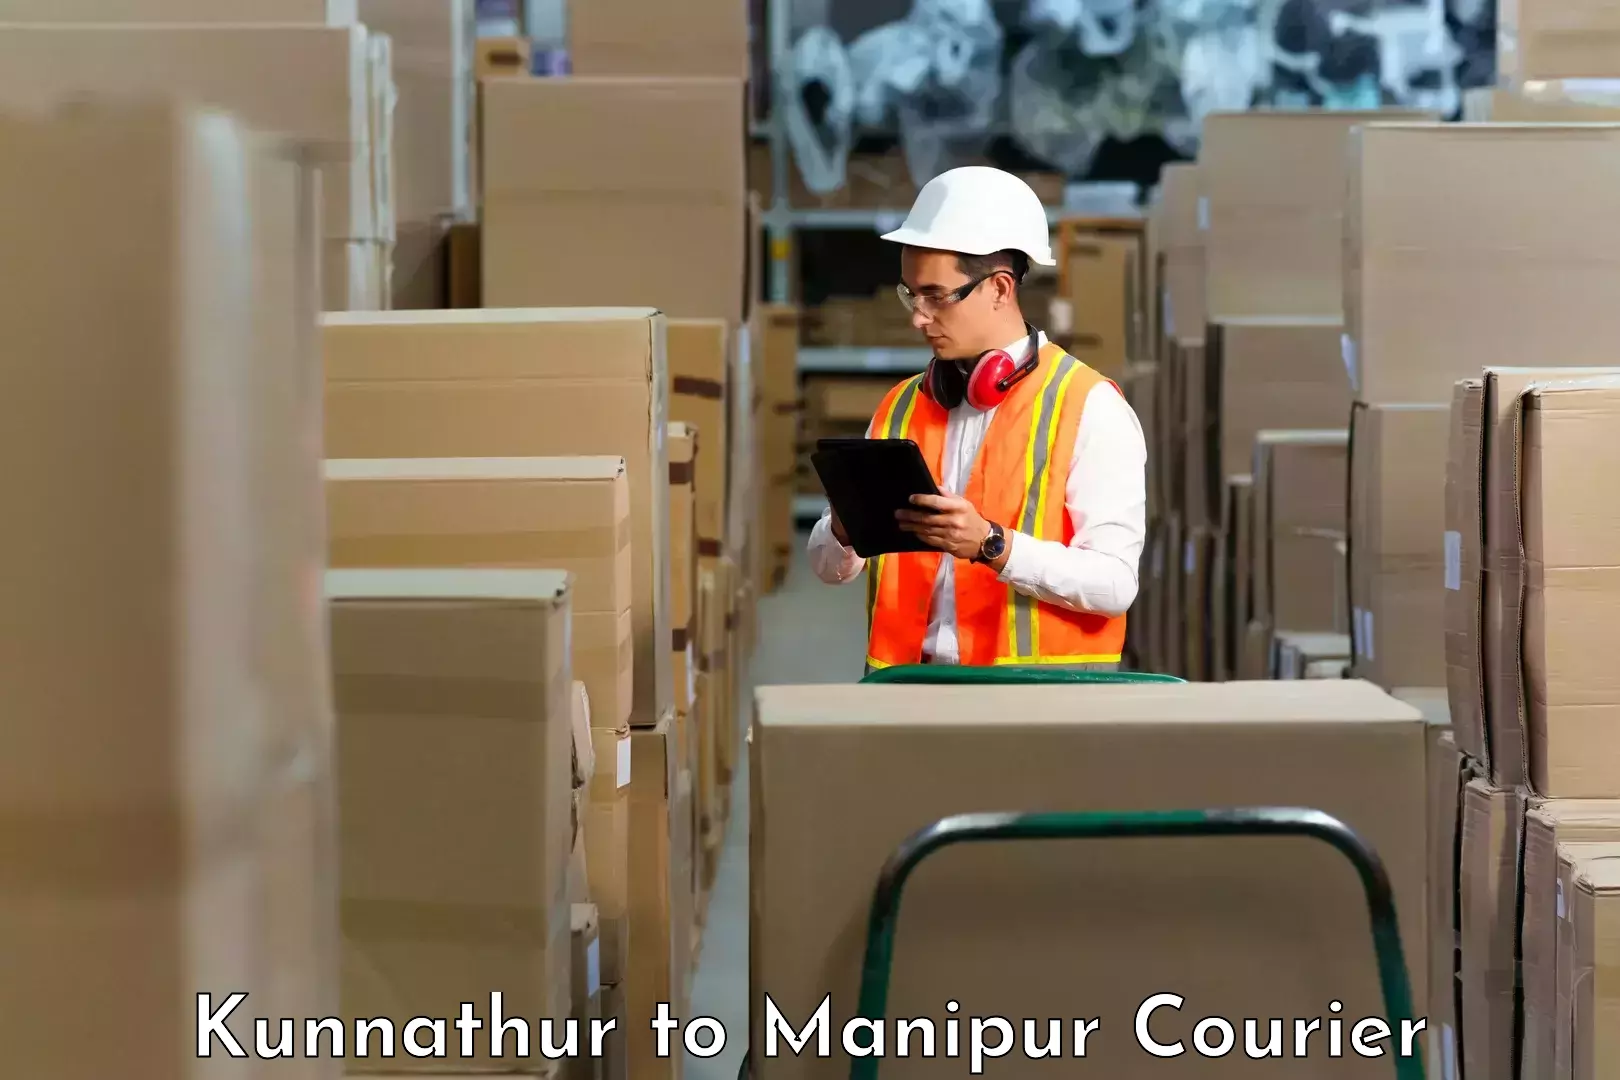 Enhanced tracking features Kunnathur to Manipur